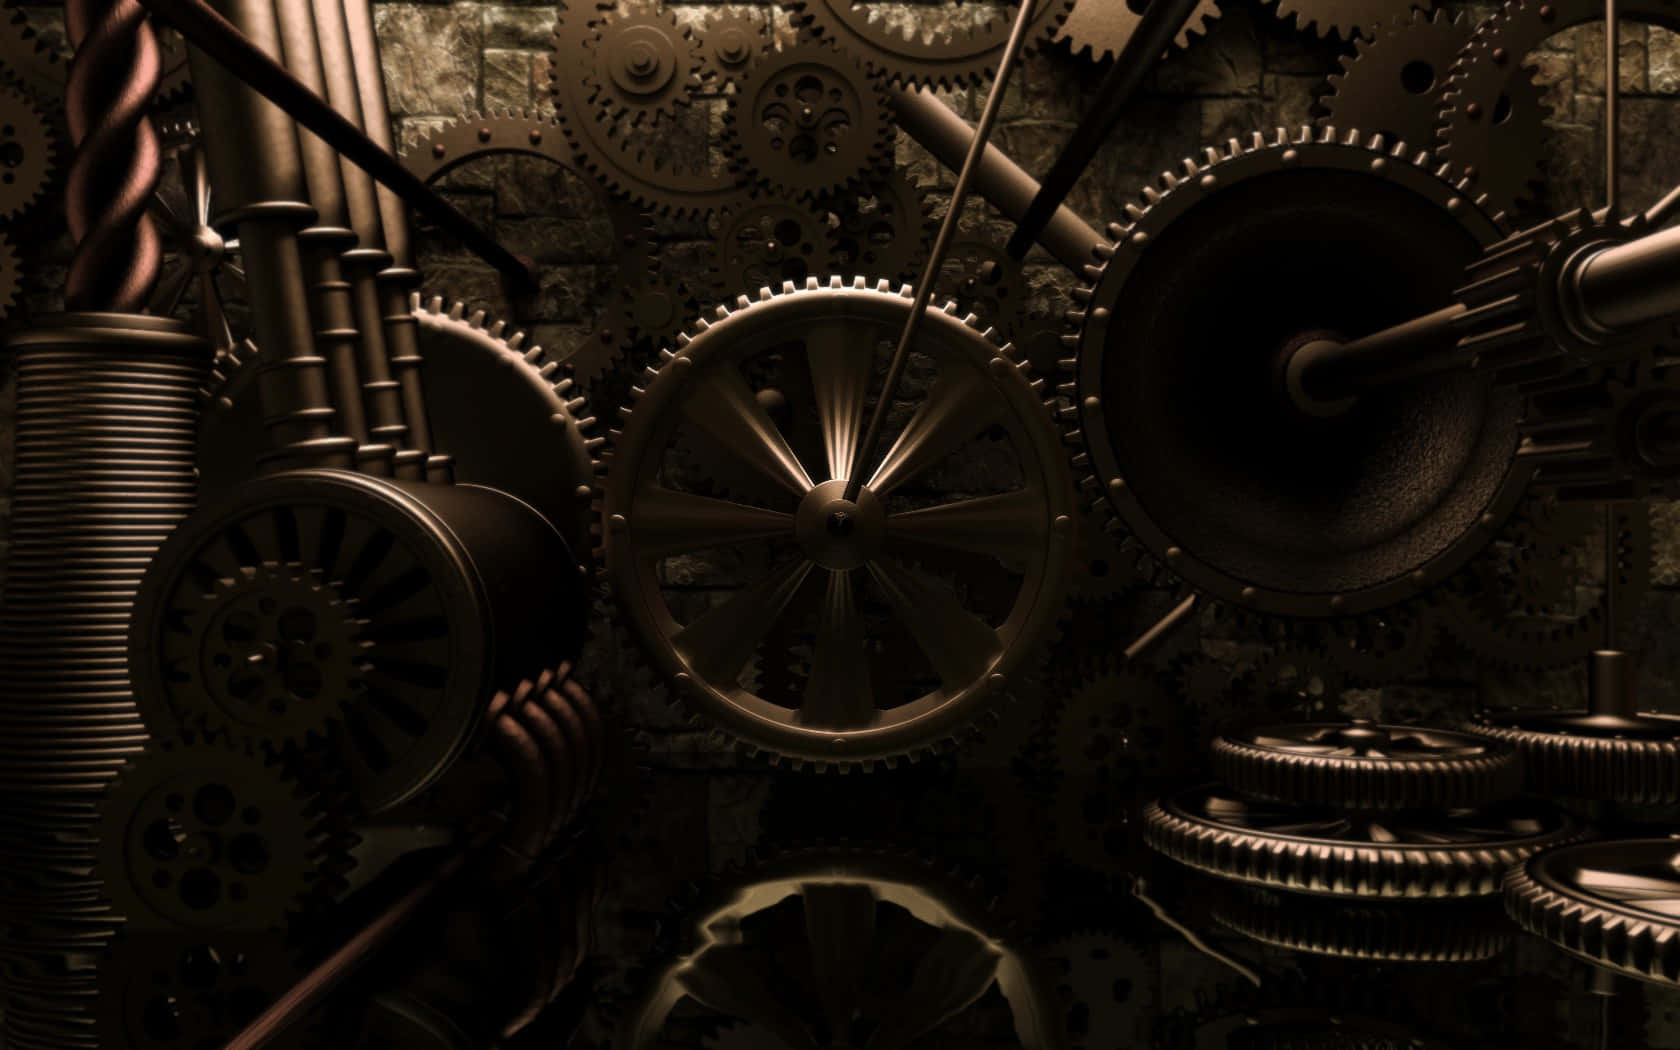 Welcome to this Steampunk world…